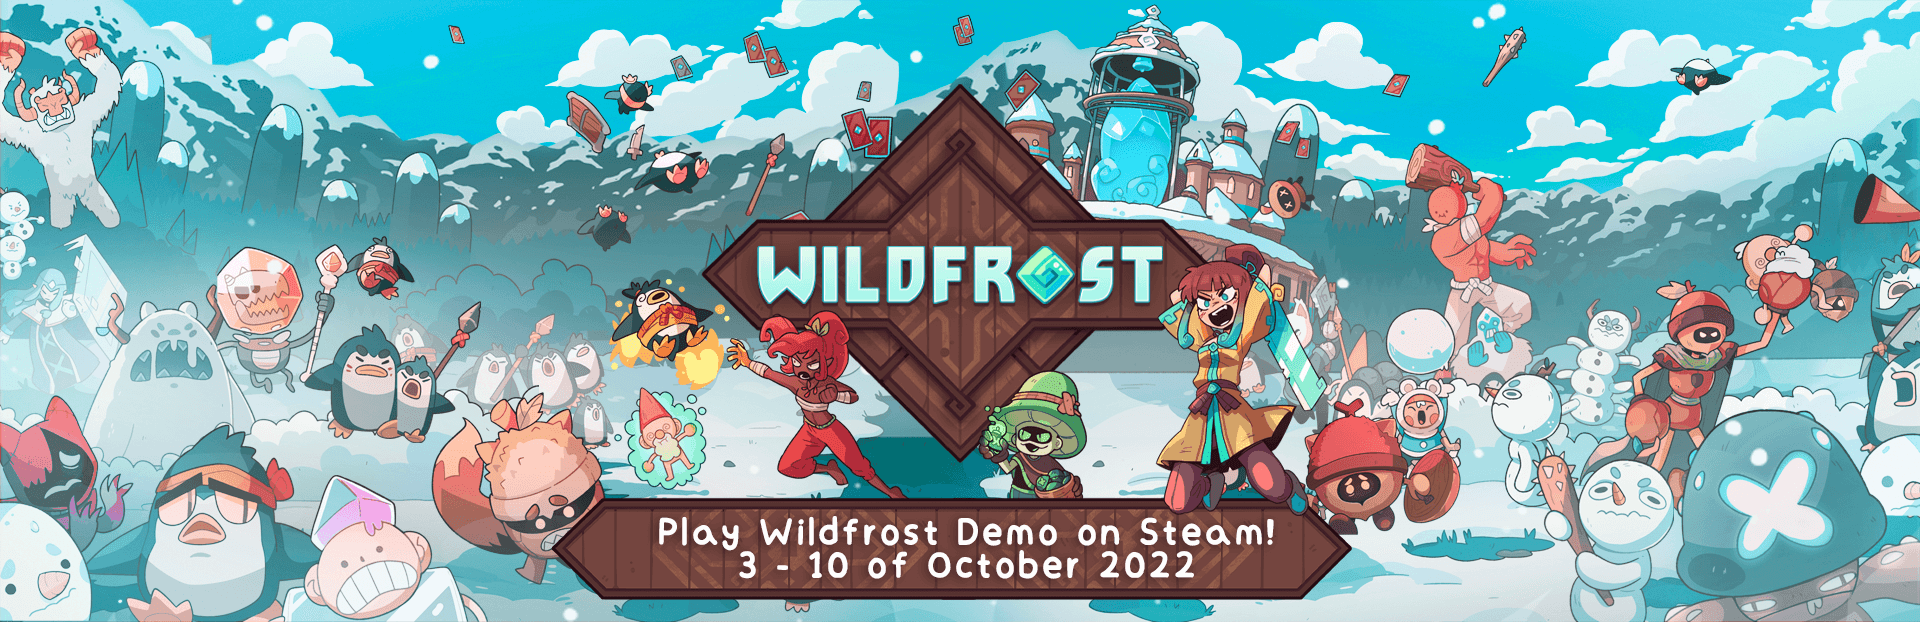 Play Wildfrost Demo (for a LIMITED TIME) on Steam Next Fest 2022!